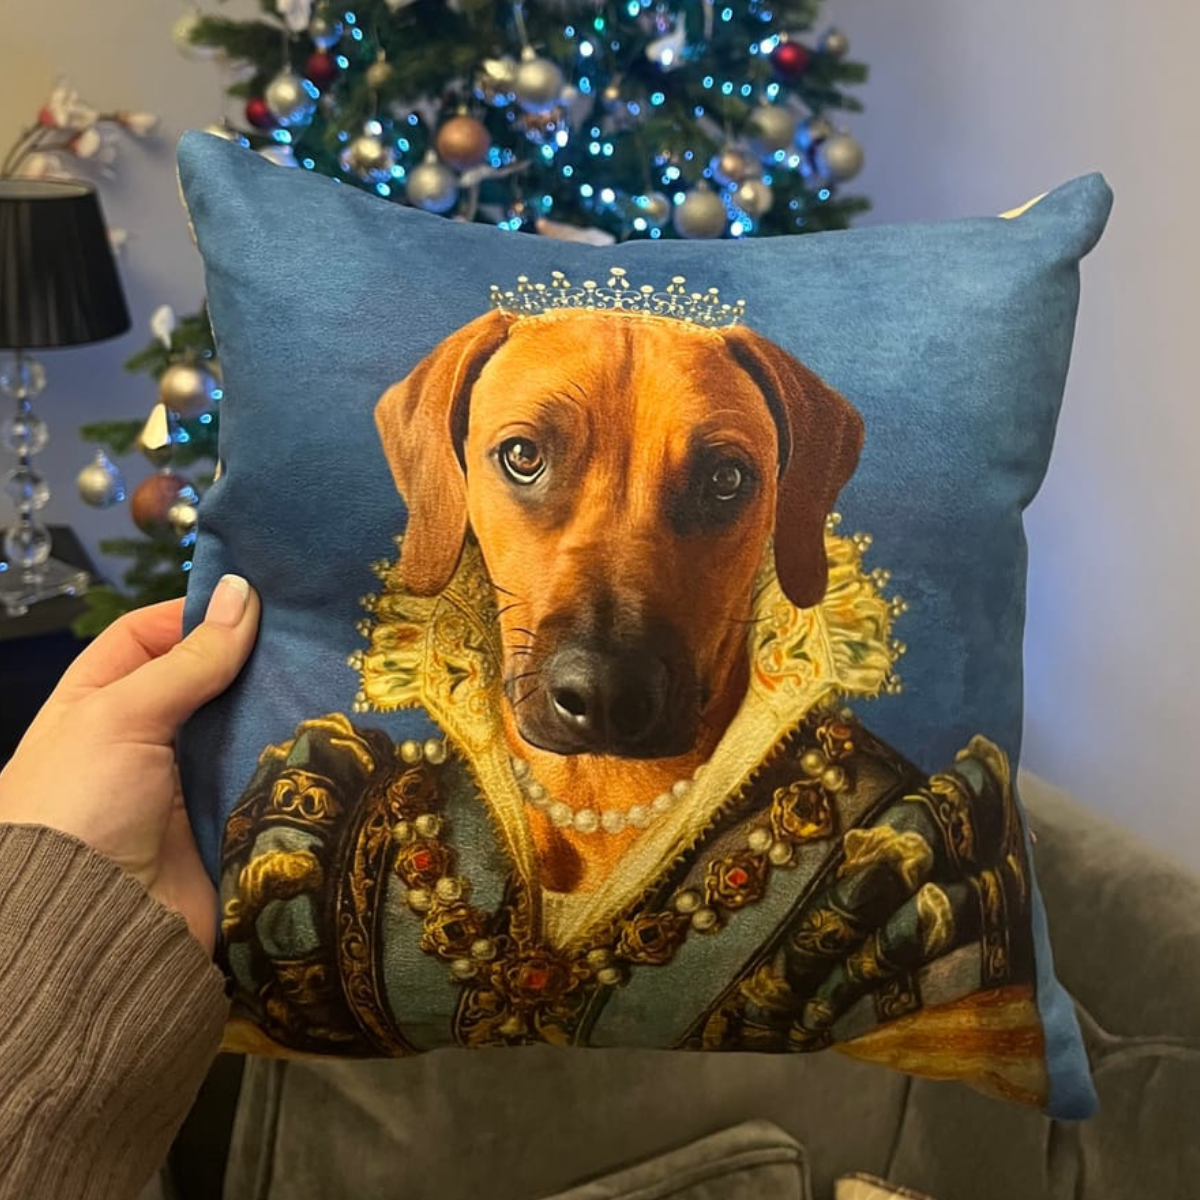 Paw & Glory, pawandglory, Pet Portrait cushion, dog personalized pillow, pillows with dogs picture, custom printed pillows, my pet pillow, customized throw pillows, photo dog pillows